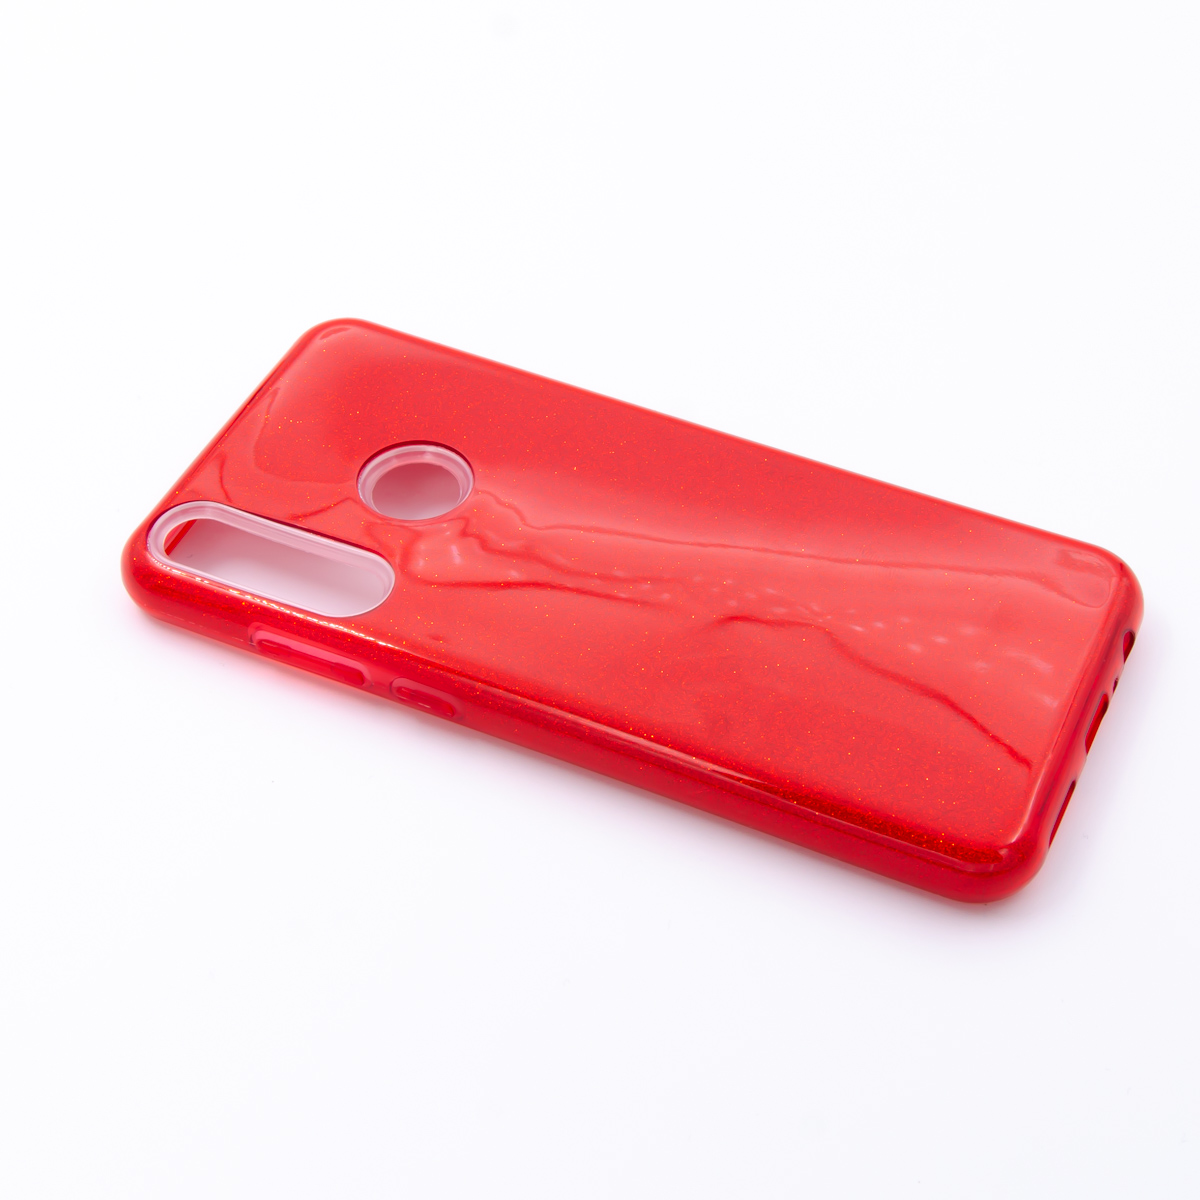 Tpu sparkly shine y6p (red)